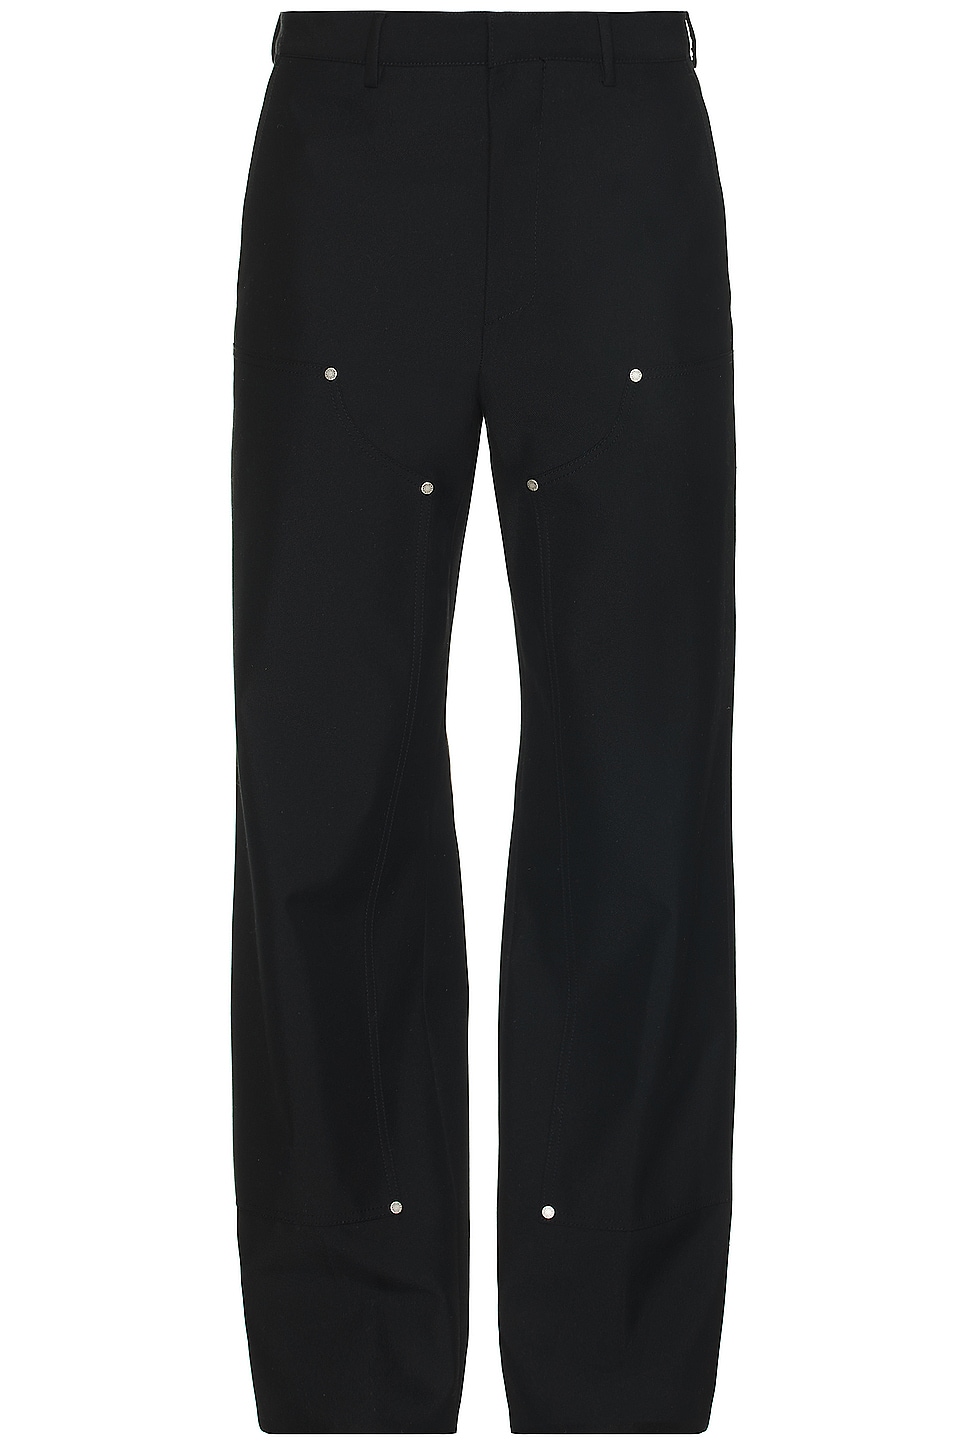 Image 1 of Palm Angels Monogram Workwear Pant in Black & Off White